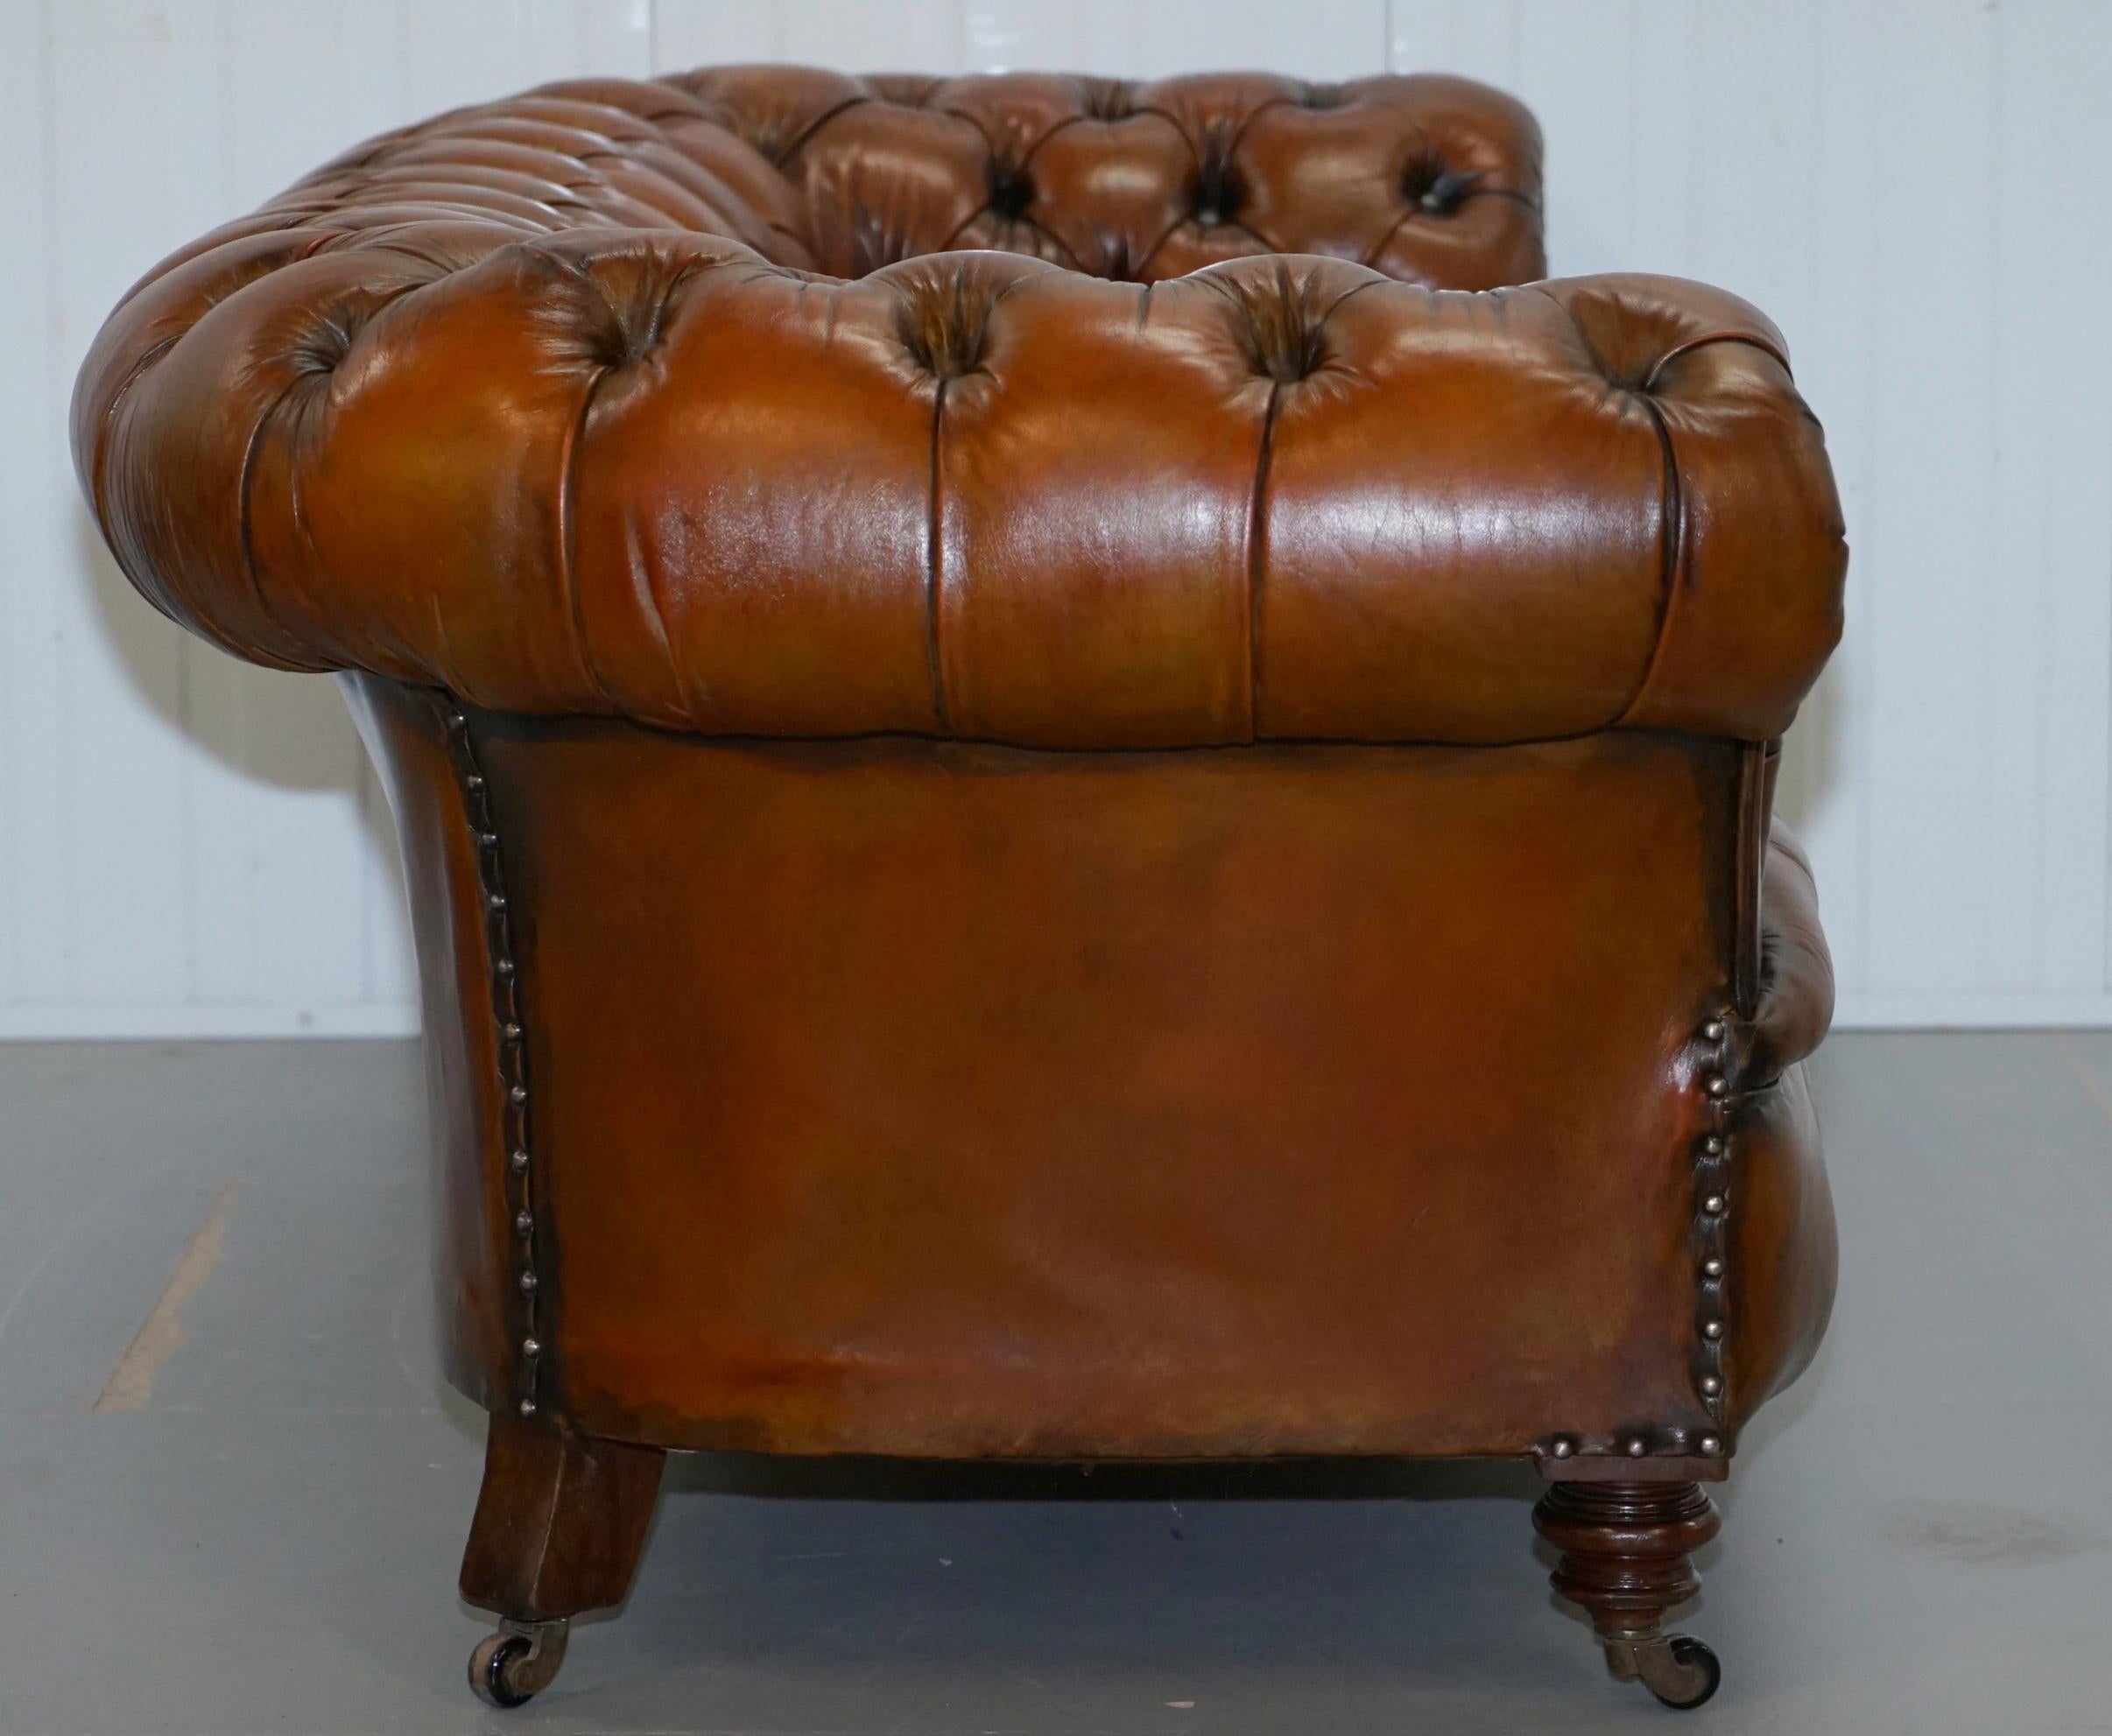 Restored Victorian 1890 Cornelius V. Smith Stamp Chesterfield Leather Sofa Brown For Sale 6